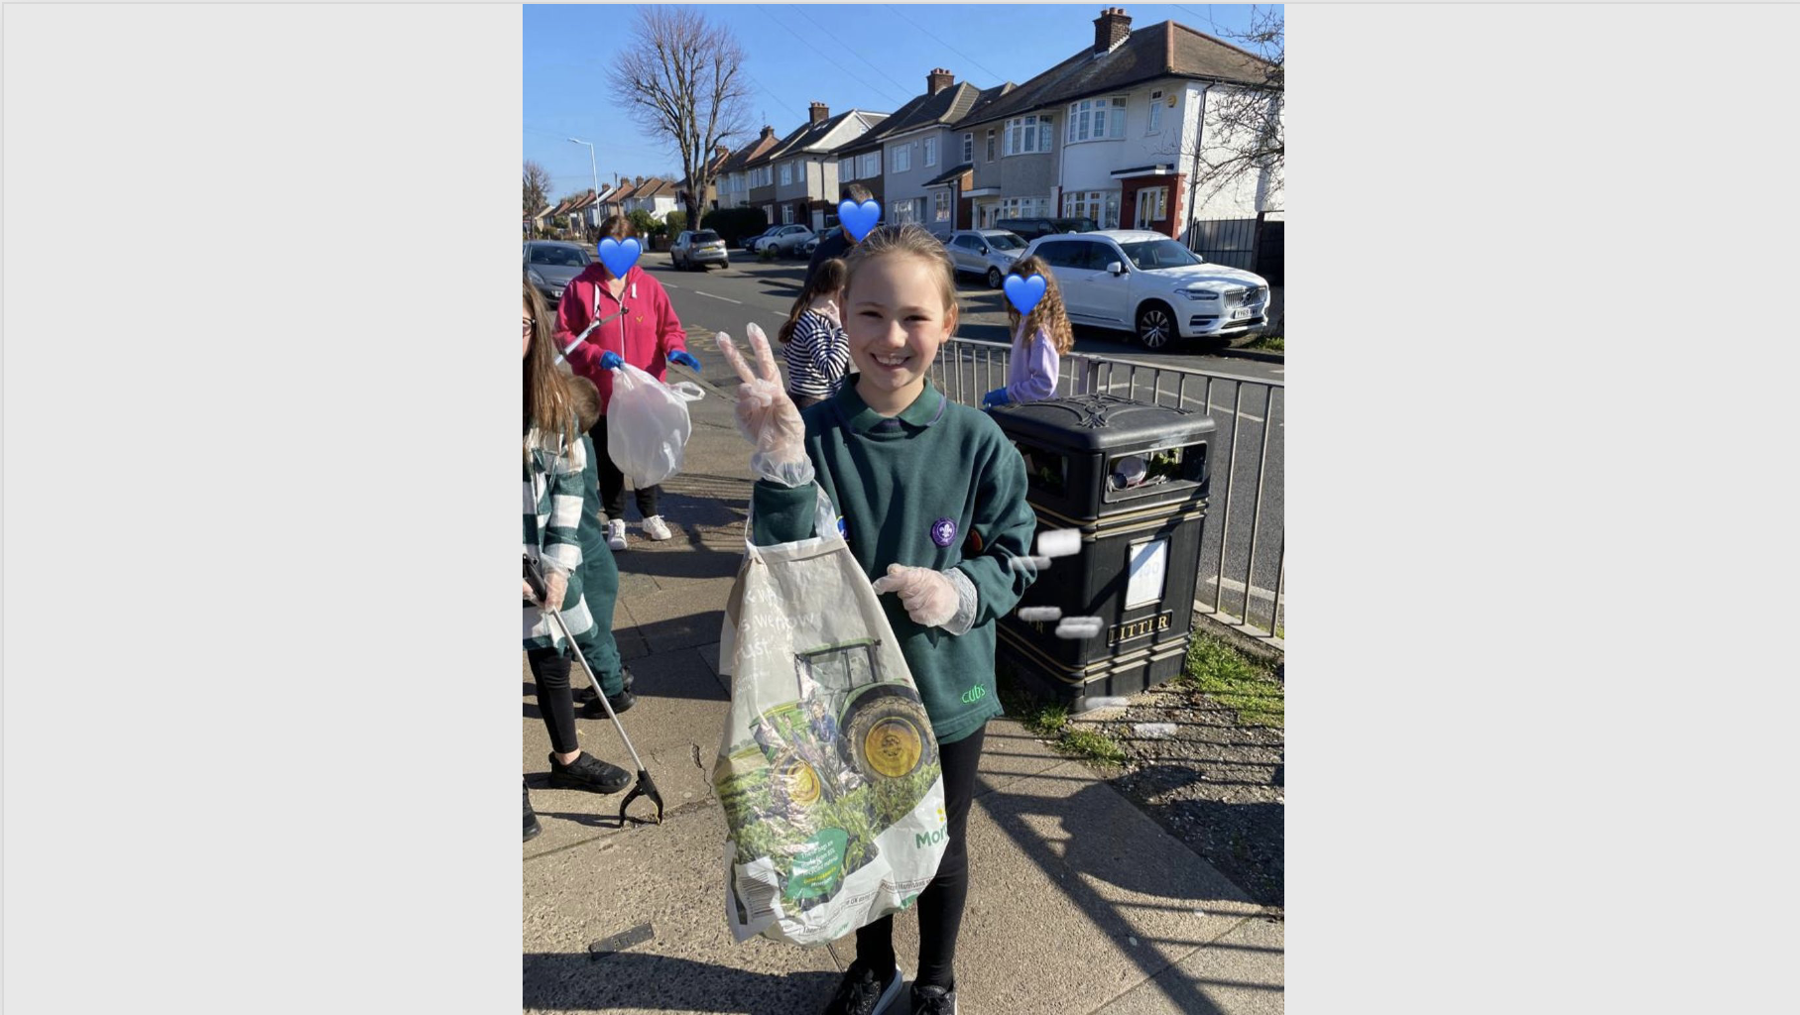 A Cub Scout is holding a carrier bag with gloves on. She's smiling at the camera in her Cubs uniform and doing a 'peace' sign with her right hand. She's standing on a pavement with a bin just behind her and there are other young people and adults in the background.